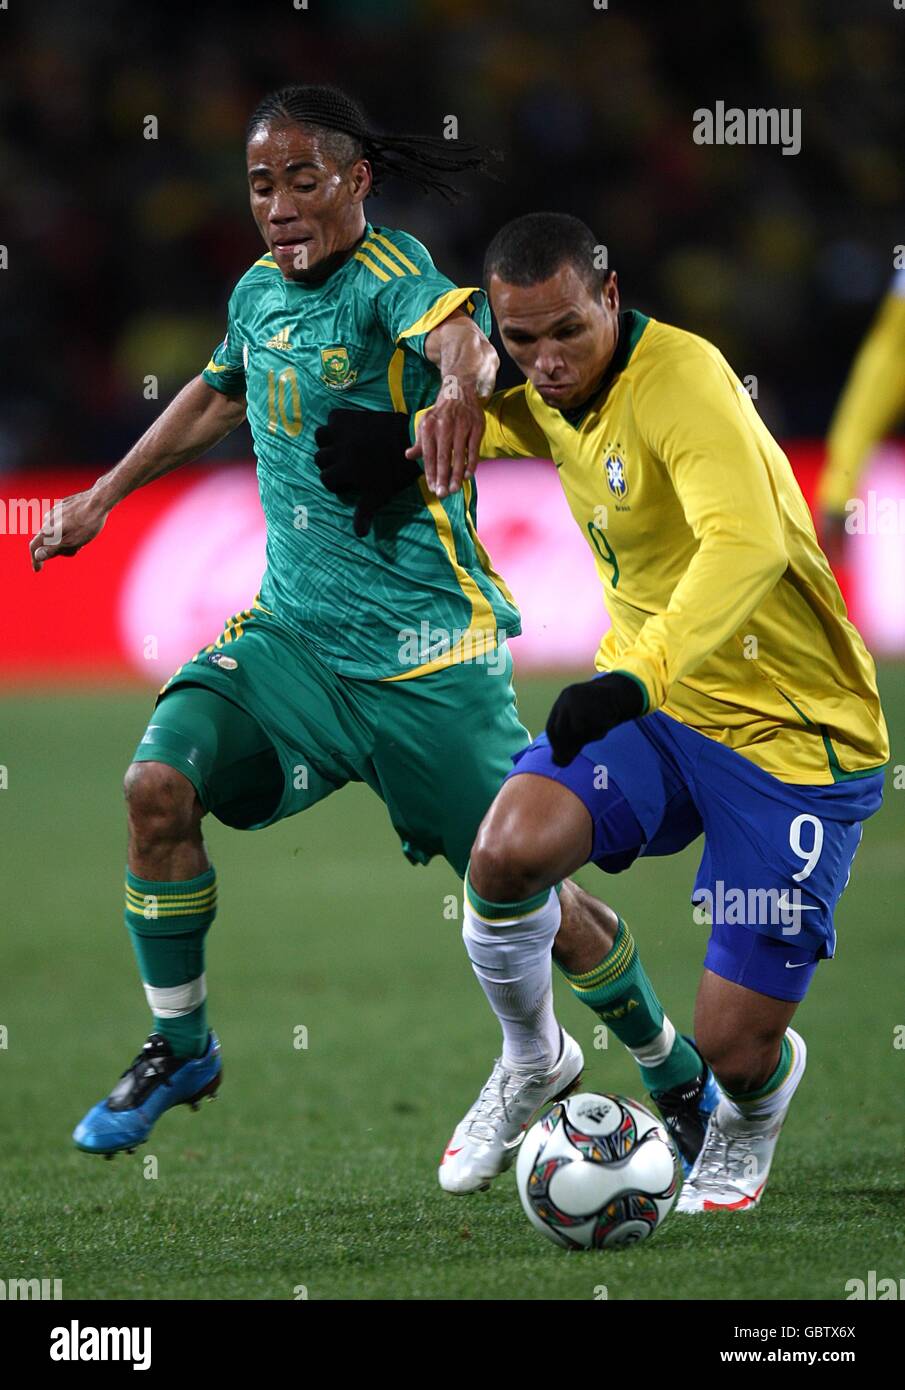 Soccer - 2009 FIFA Confederations Cup - Semi Finals - Brazil v South Africa - Ellis Park. Brazil's Luis Fabiano (right) and South Africa's Steven Pienaar (left) battle for the ball Stock Photo